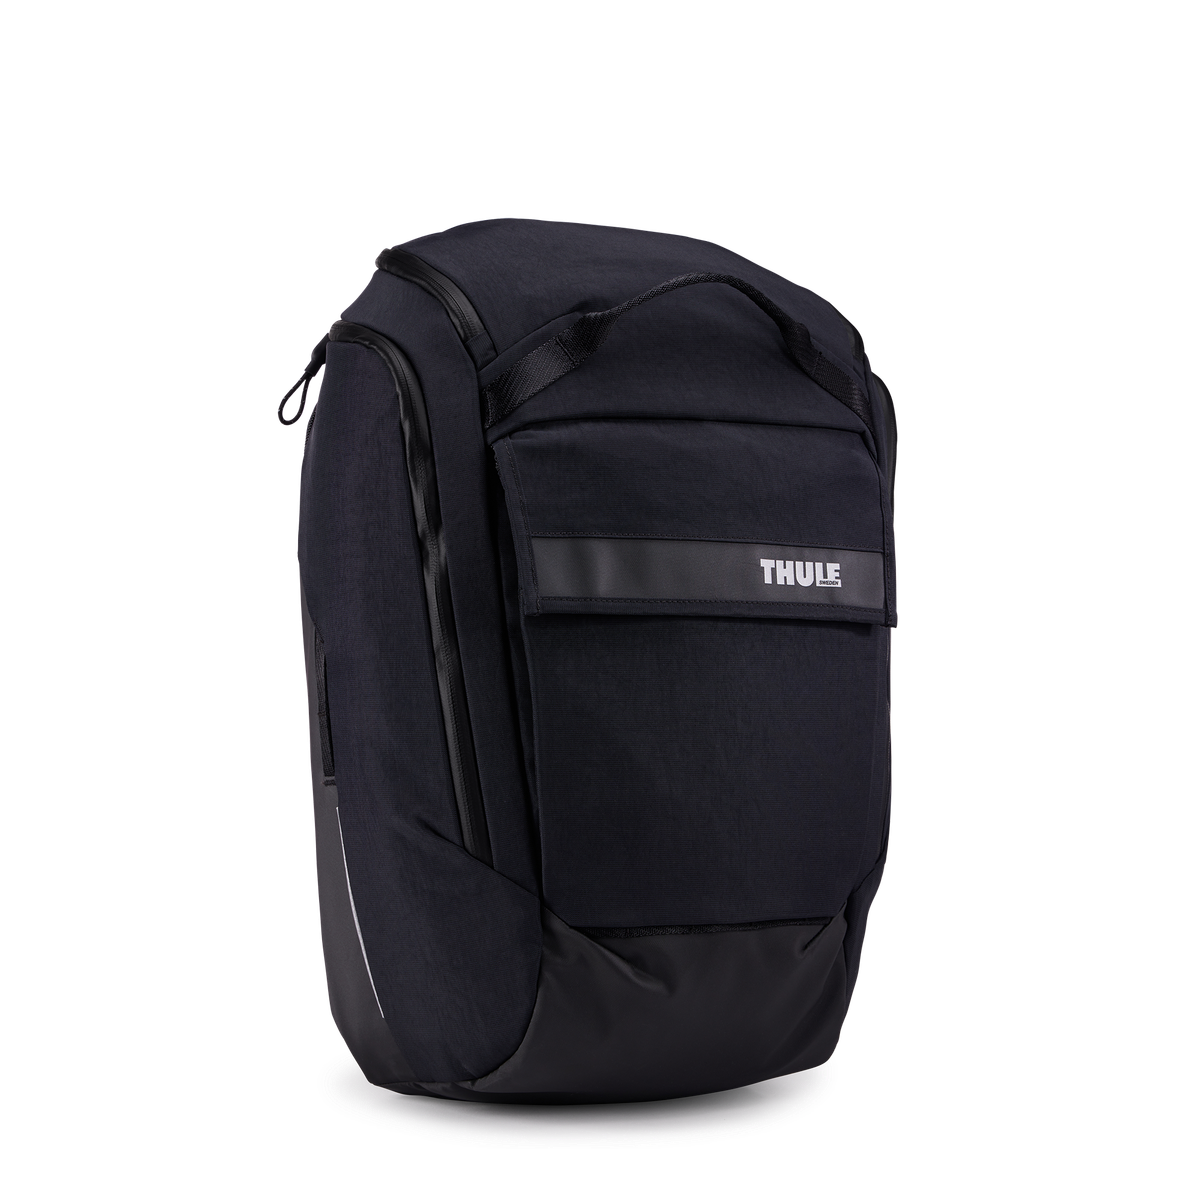 Thule Paramount hybrid bike pannier and backpack 26L black